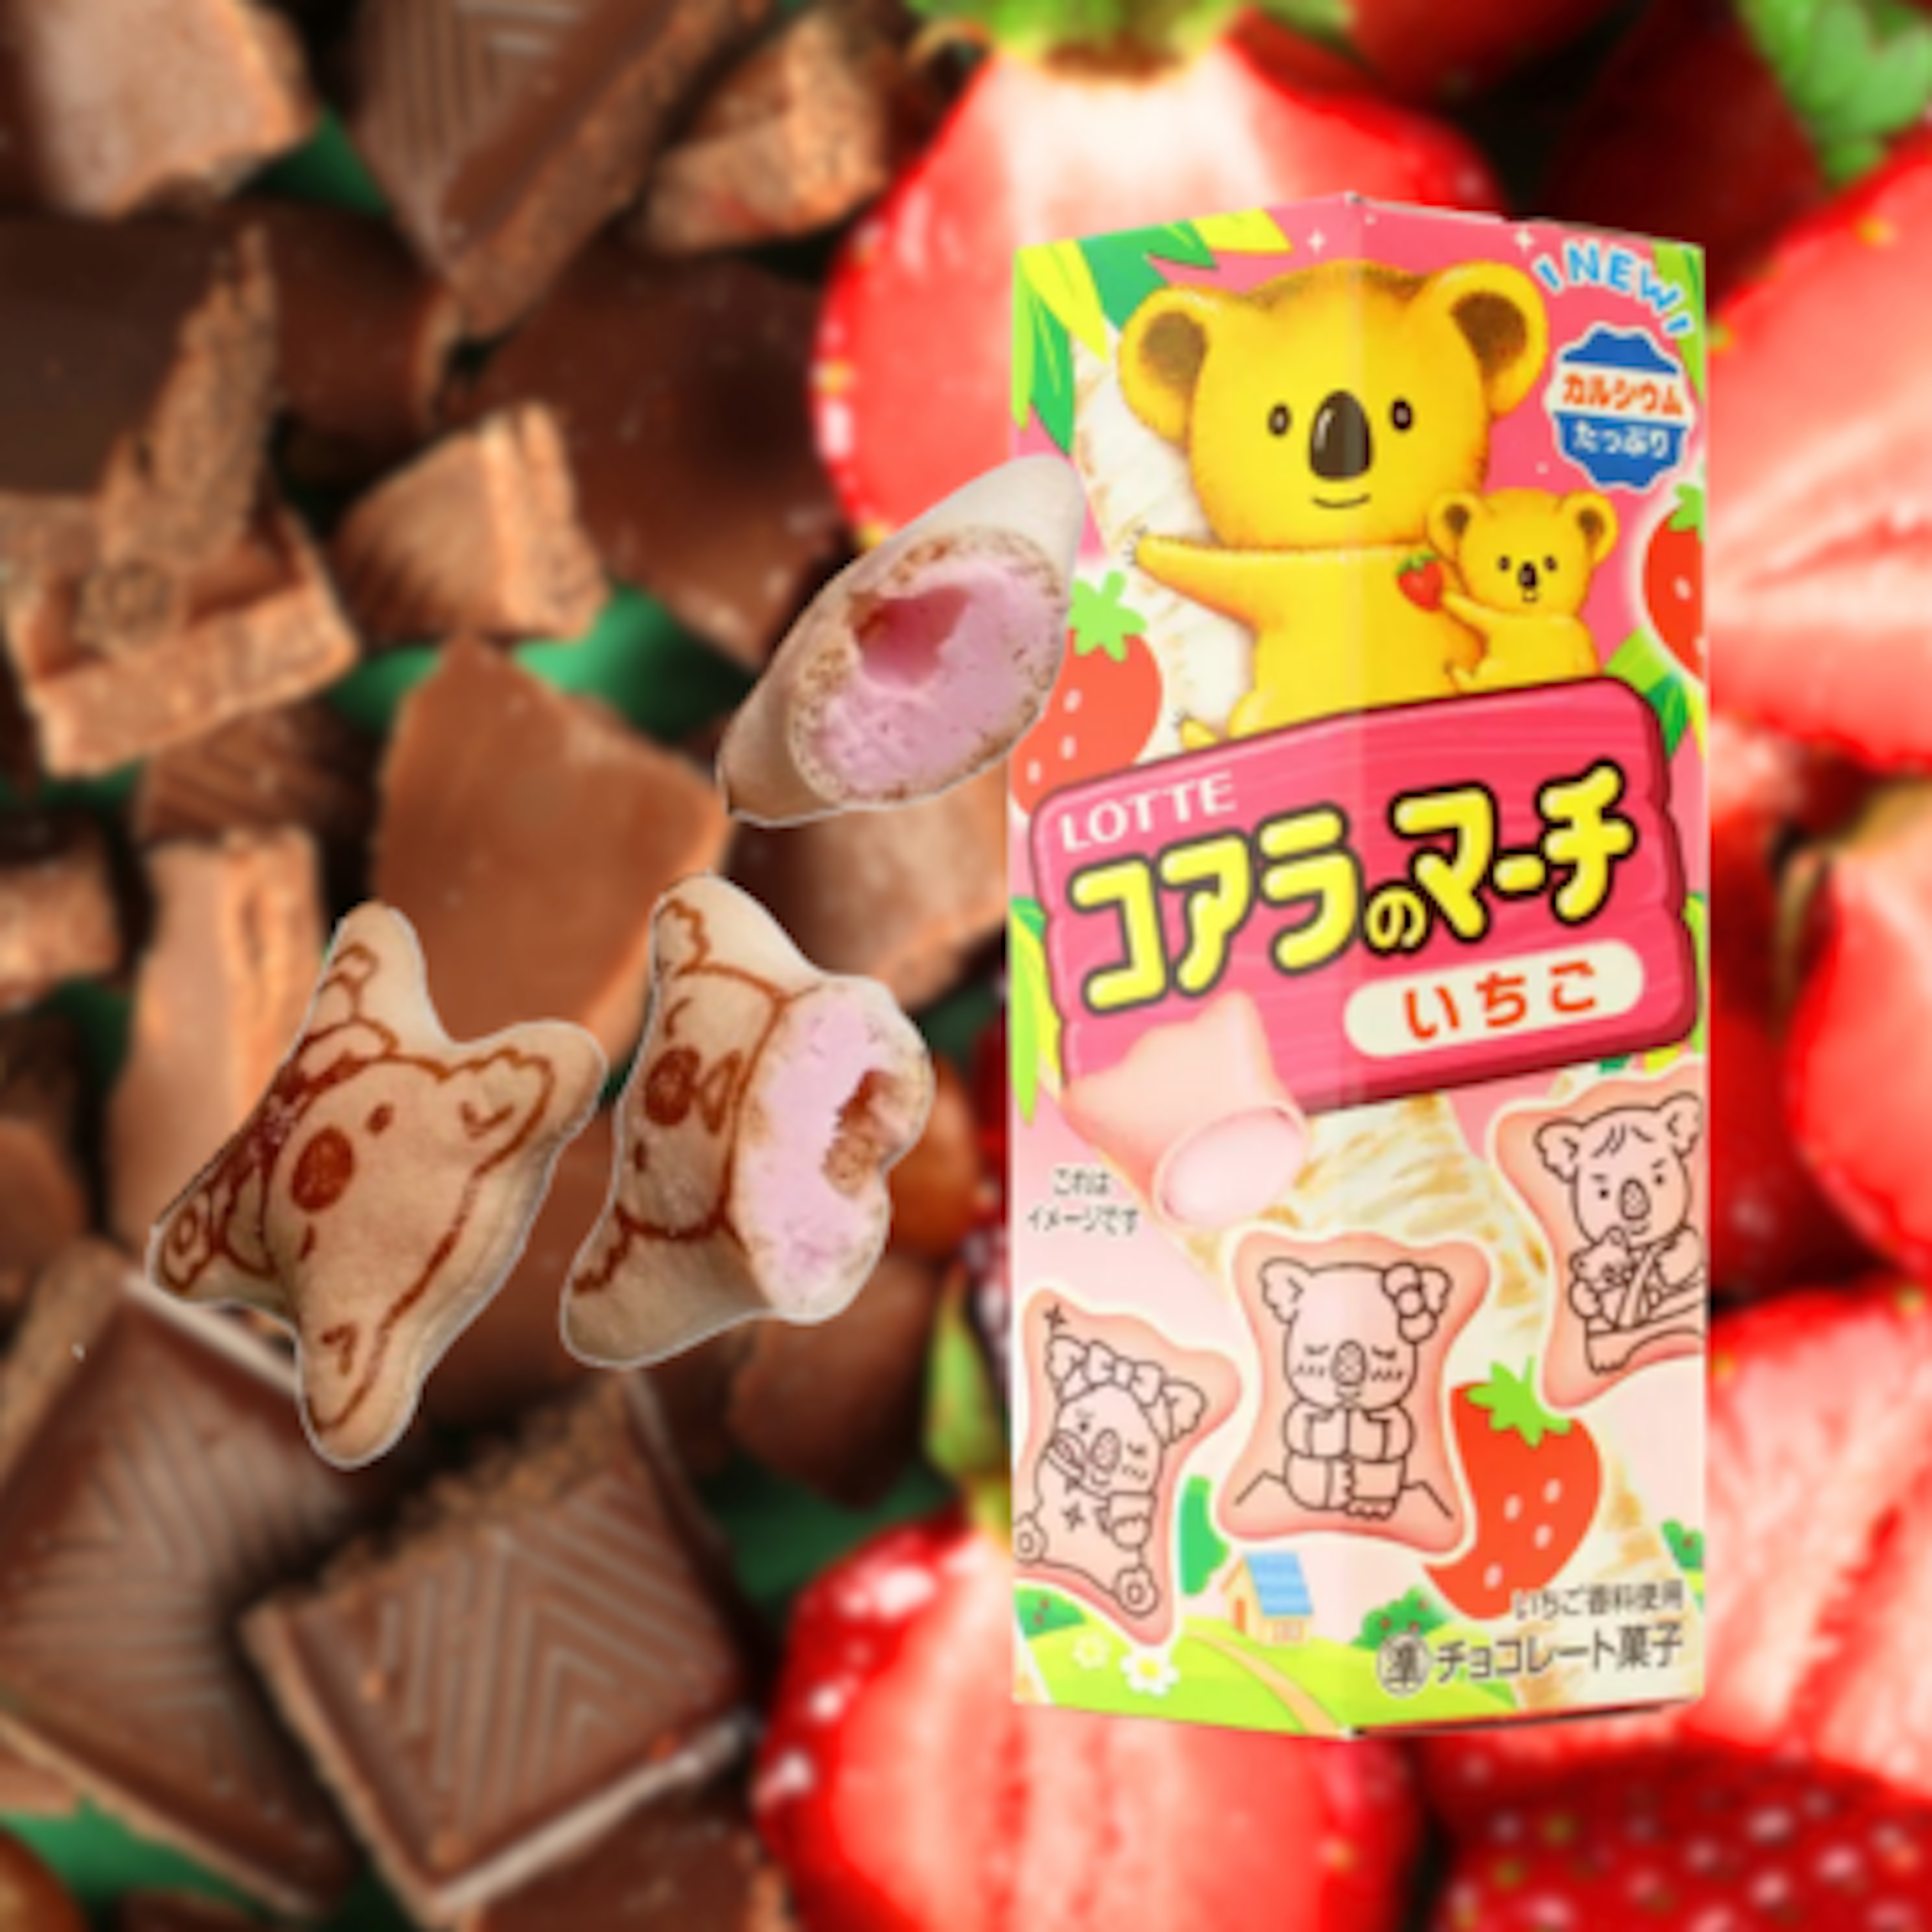 Lotte Koala's March Strawberry Cookies 37g - Delicious and Crunchy Cookies